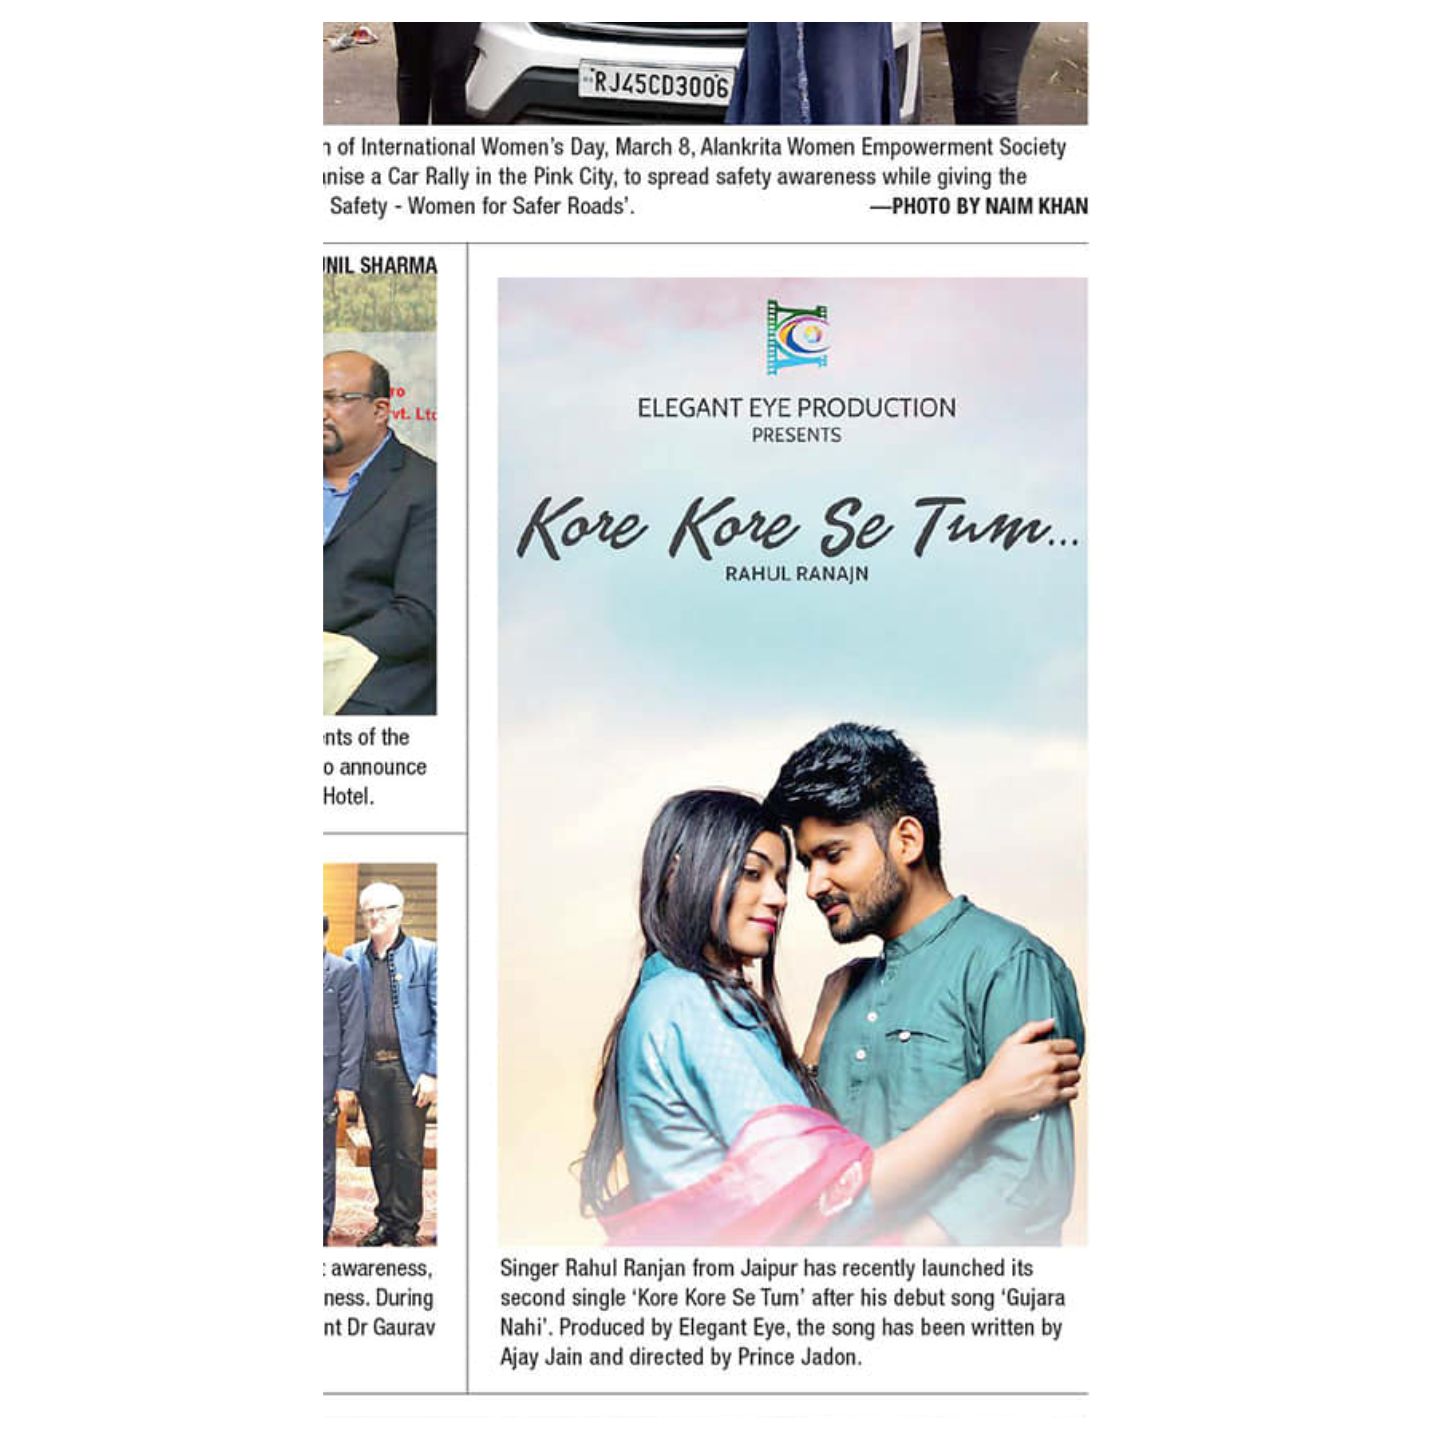 Rahul Ranjan's second song Kore Kore Se Tum Launched